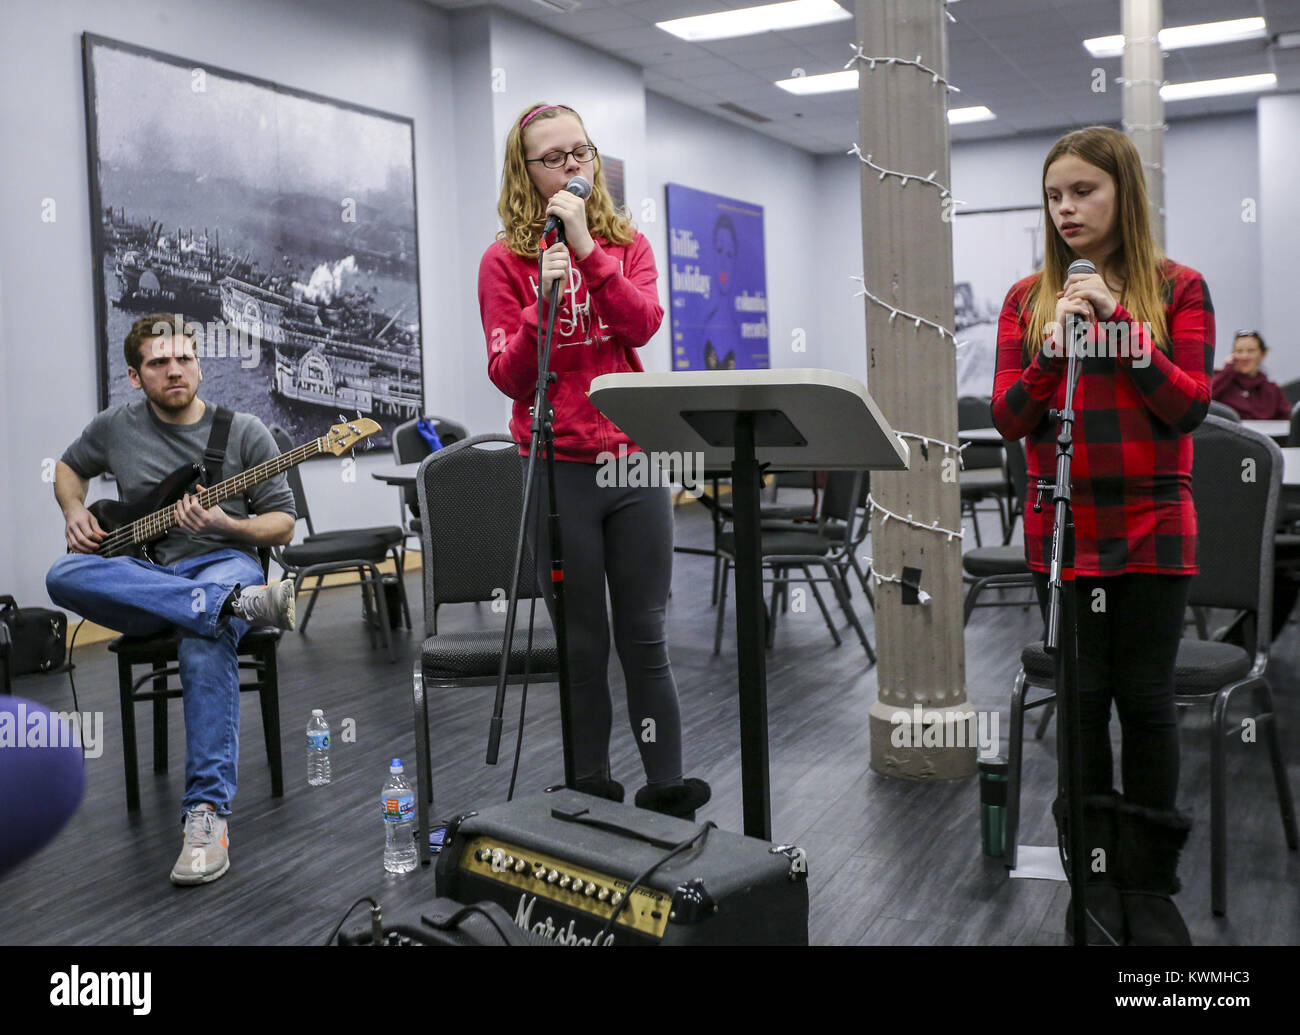 Davenport, Iowa, USA. 27th Dec, 2016. Vocalists Alexa Mueller, 11, center, of Hampton, and Anastashia Burmeister, 12, right, of Davenport practice with bassist Tommy Tallman of Davenport and the rest of their group at the River Music Experience building in Davenport on Tuesday, December 27, 2016. The annual Winter Blues program features vocal and instrumental workshops as well as a concentration on blues composition and improvisation. Sessions are open to area musicians aged 8-18 and run Monday through Thursday before concluding in a blues jam in the Redstone Room on Friday. (Credit Ima Stock Photo